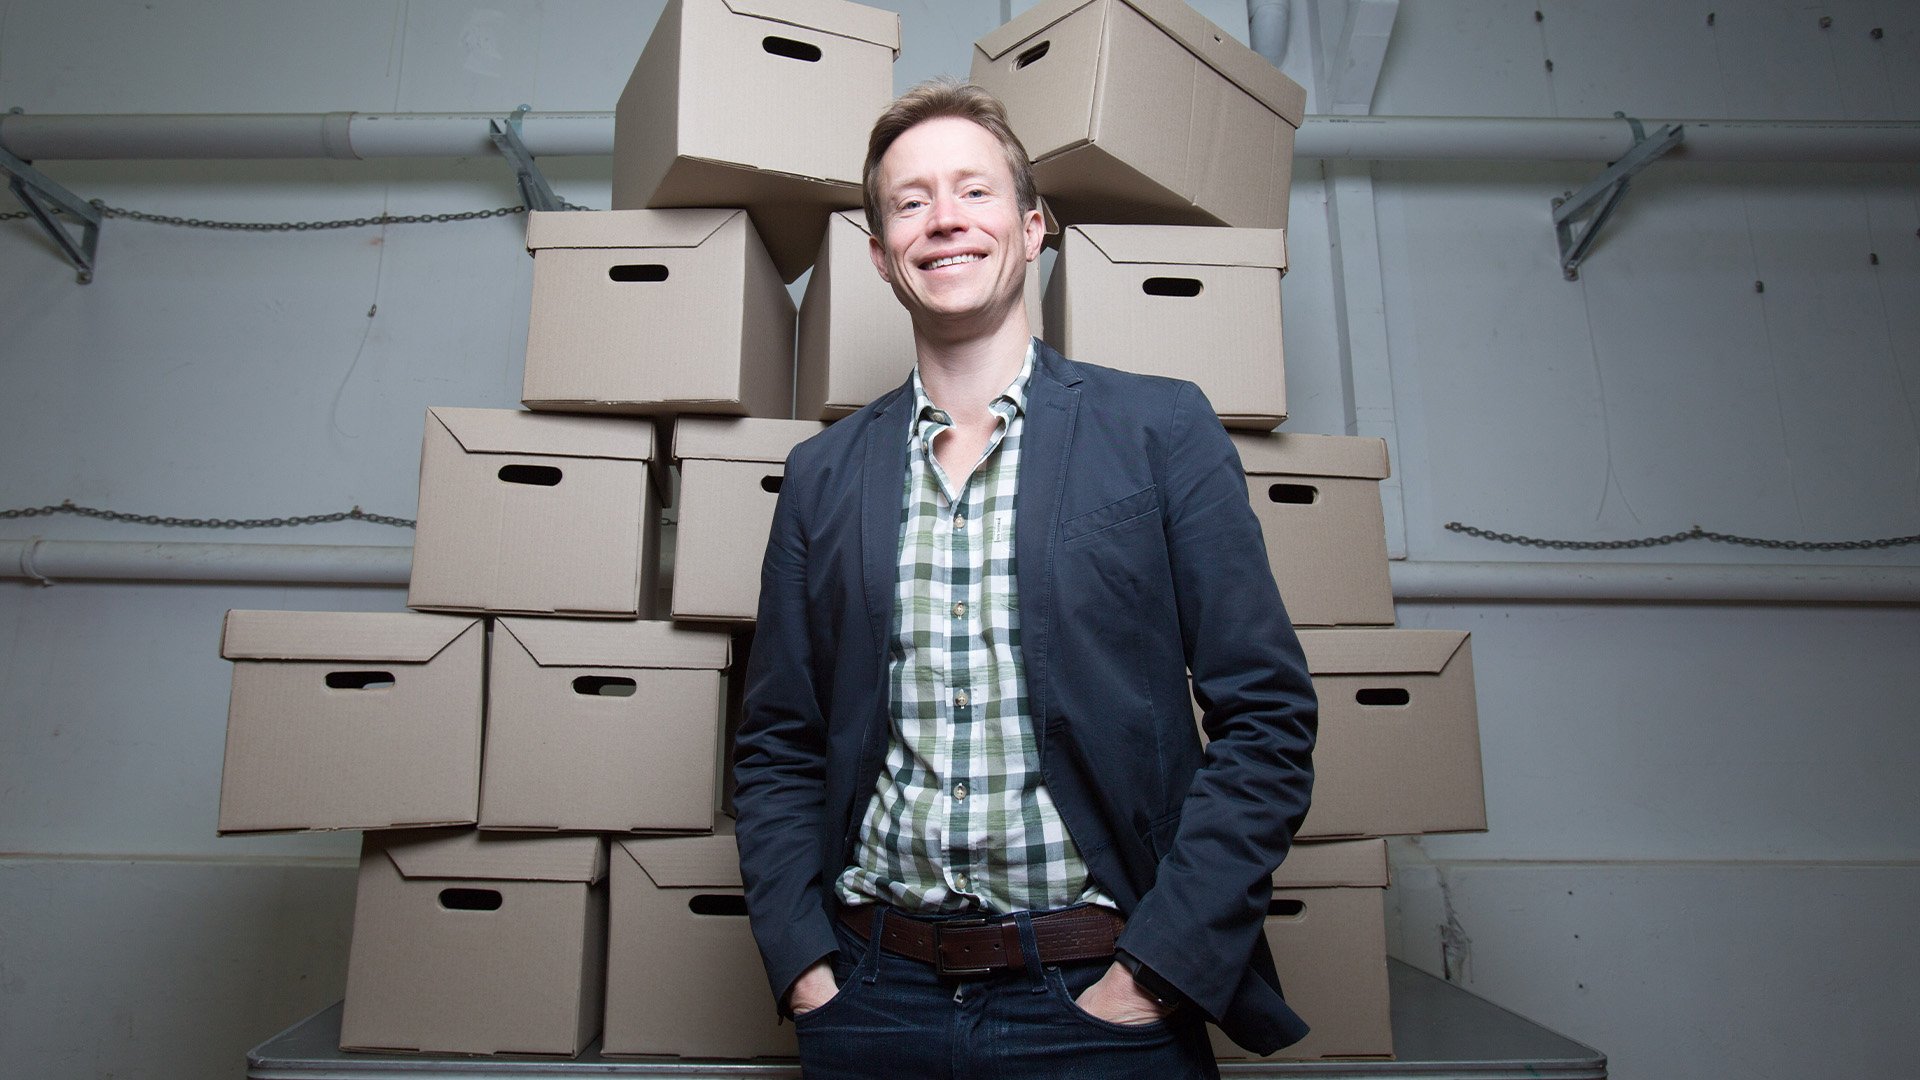 Sendle CEO Founder James Chin Moody standing behind stack of boxes